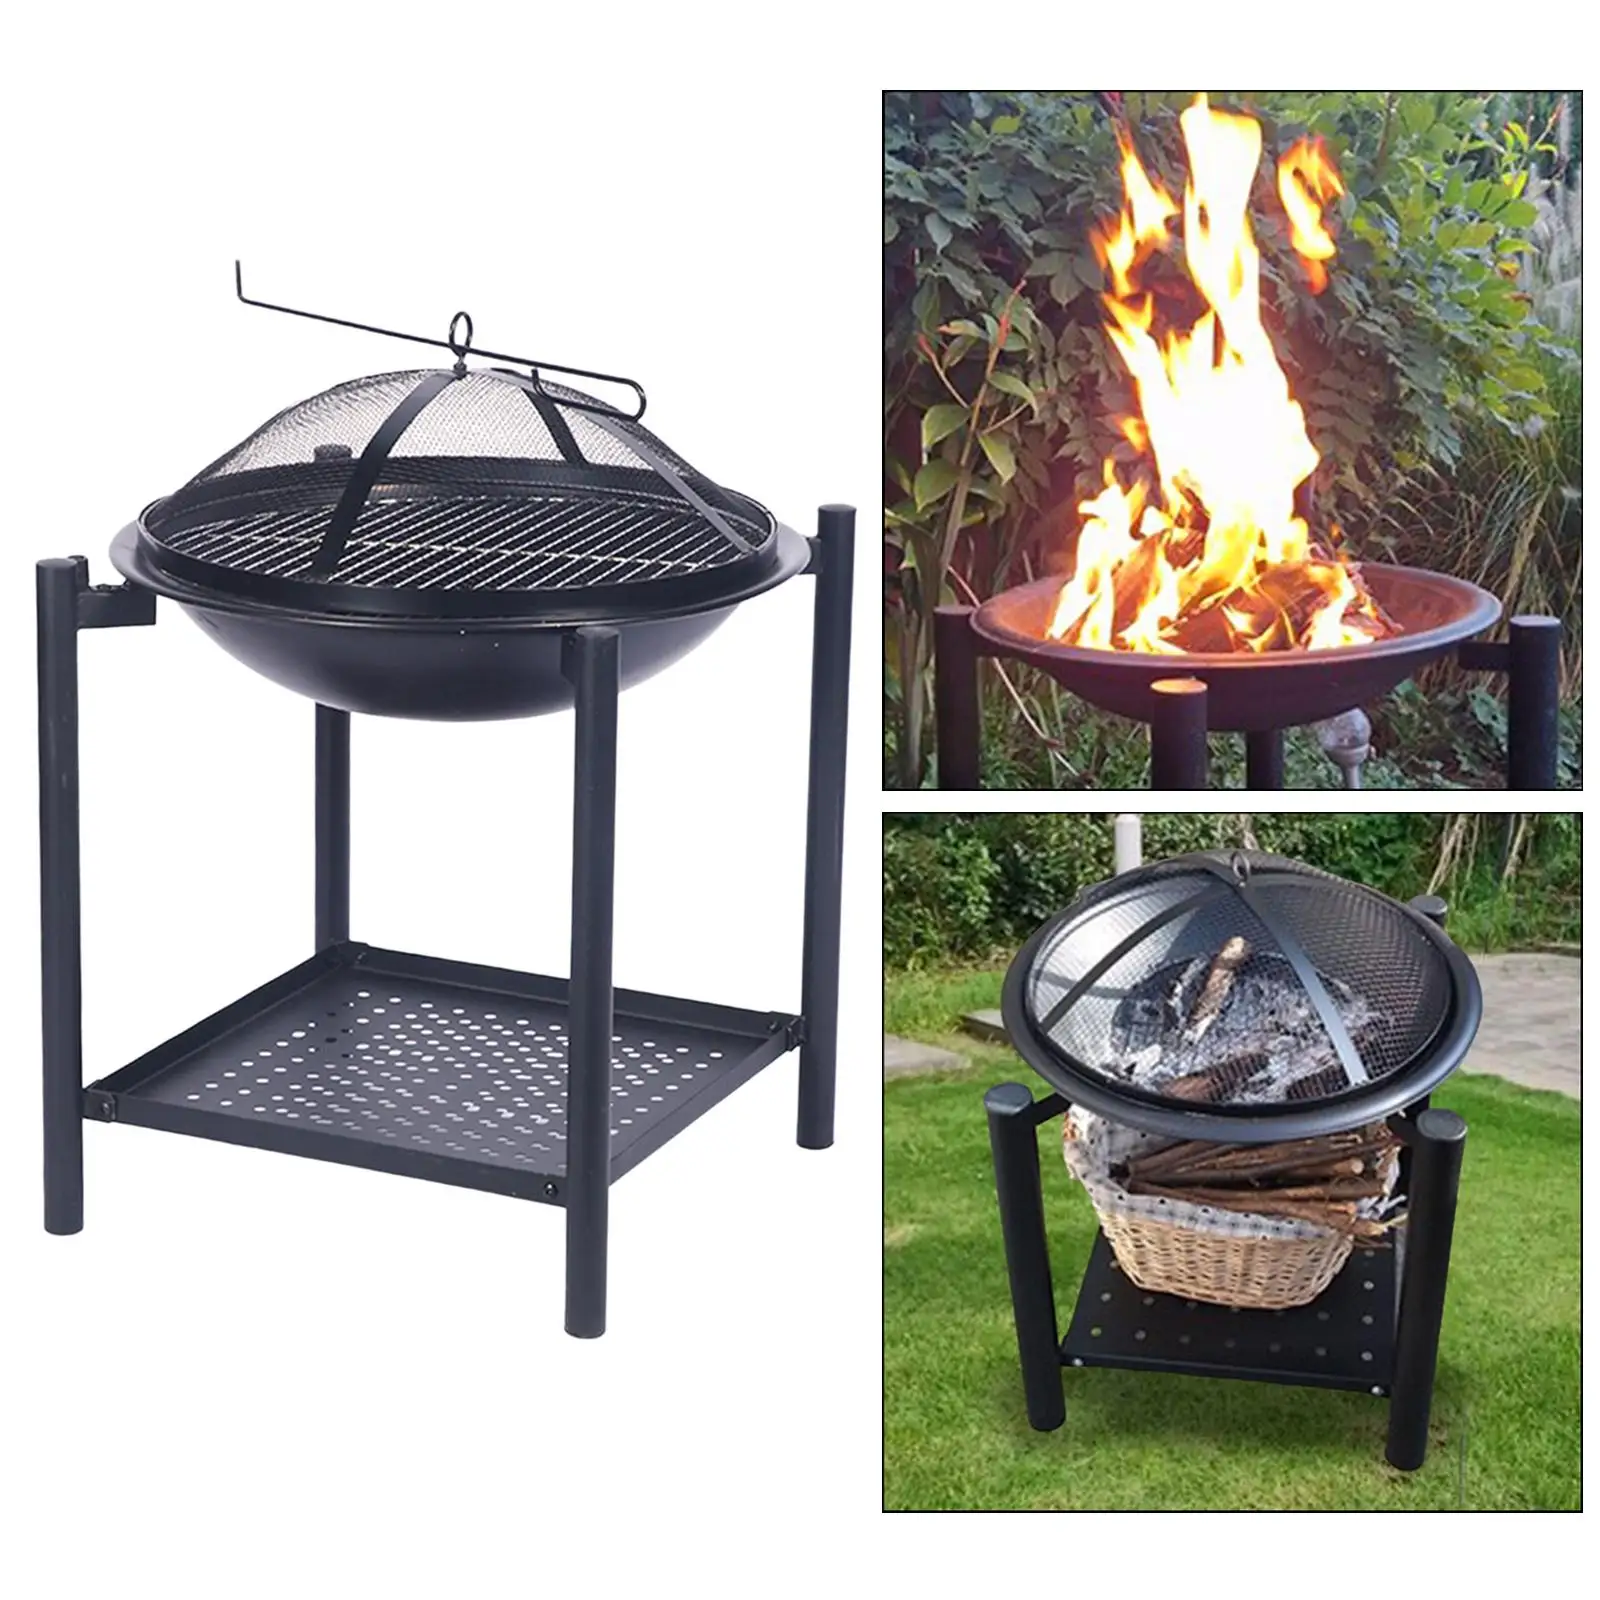 Fire Pit with Mesh Spark Screen with Grill Bowl Fireplace with Brazier Heater for Backyard Garden Camping Outdoor